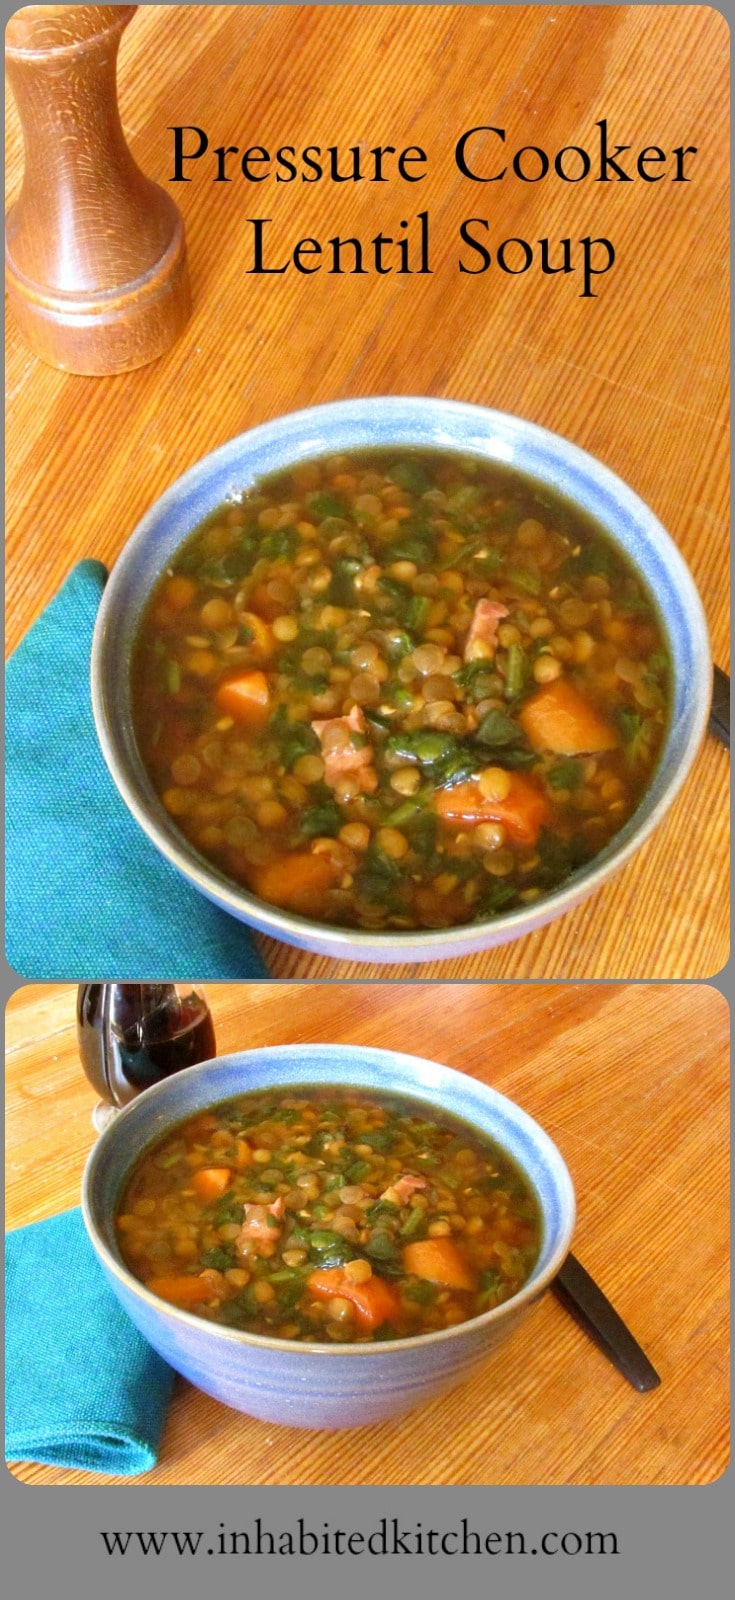 Lentil Soup in a pressure cooker - fast, easy, and delicious, Great for warm days and chilly nights - don't heat up the kitchen! 